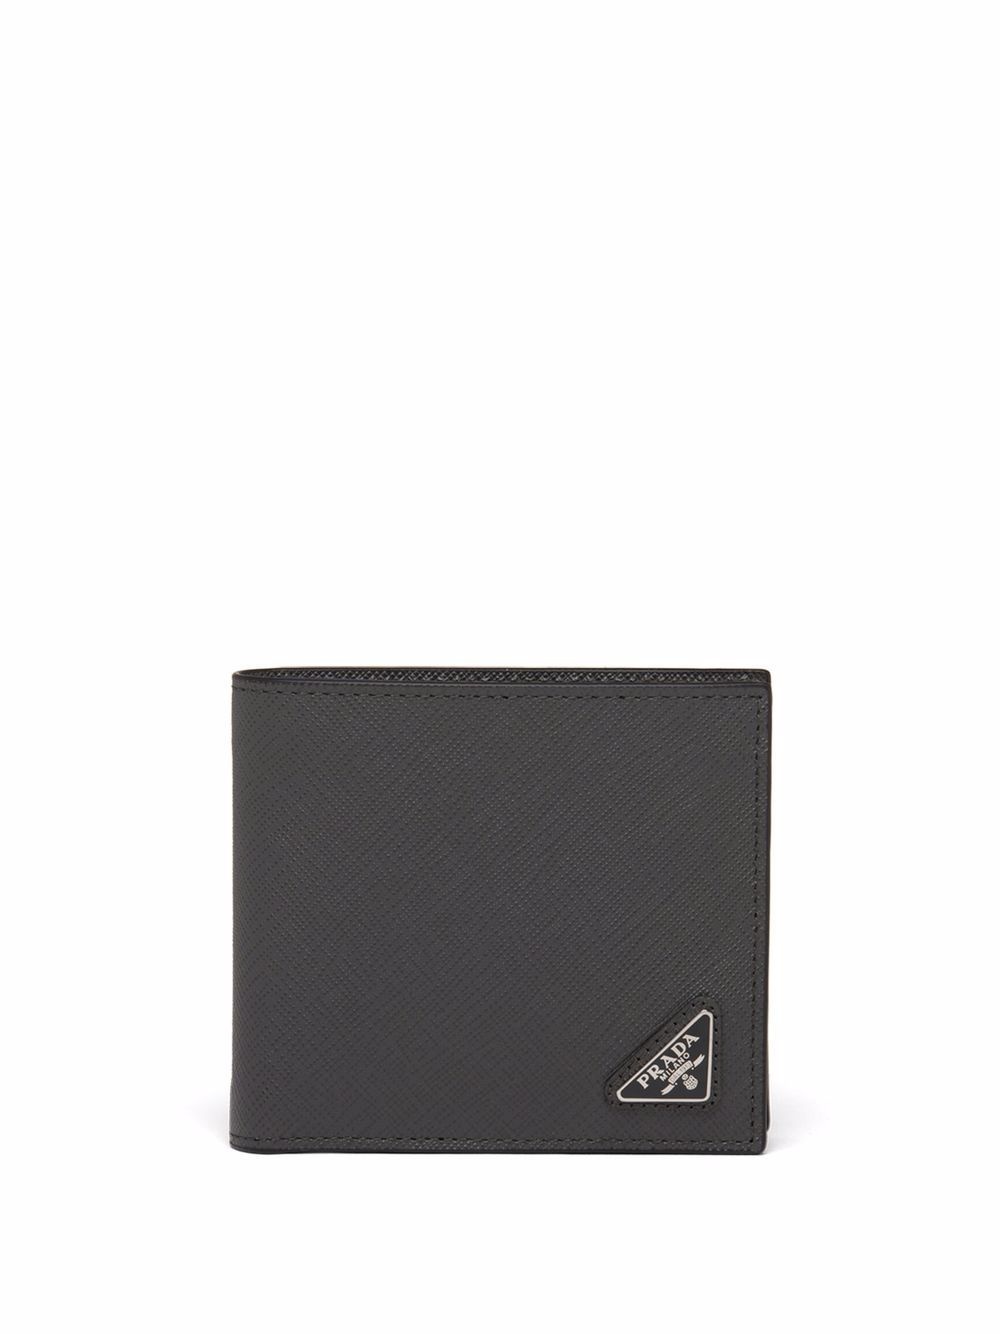 Saffiano leather wallet - 1